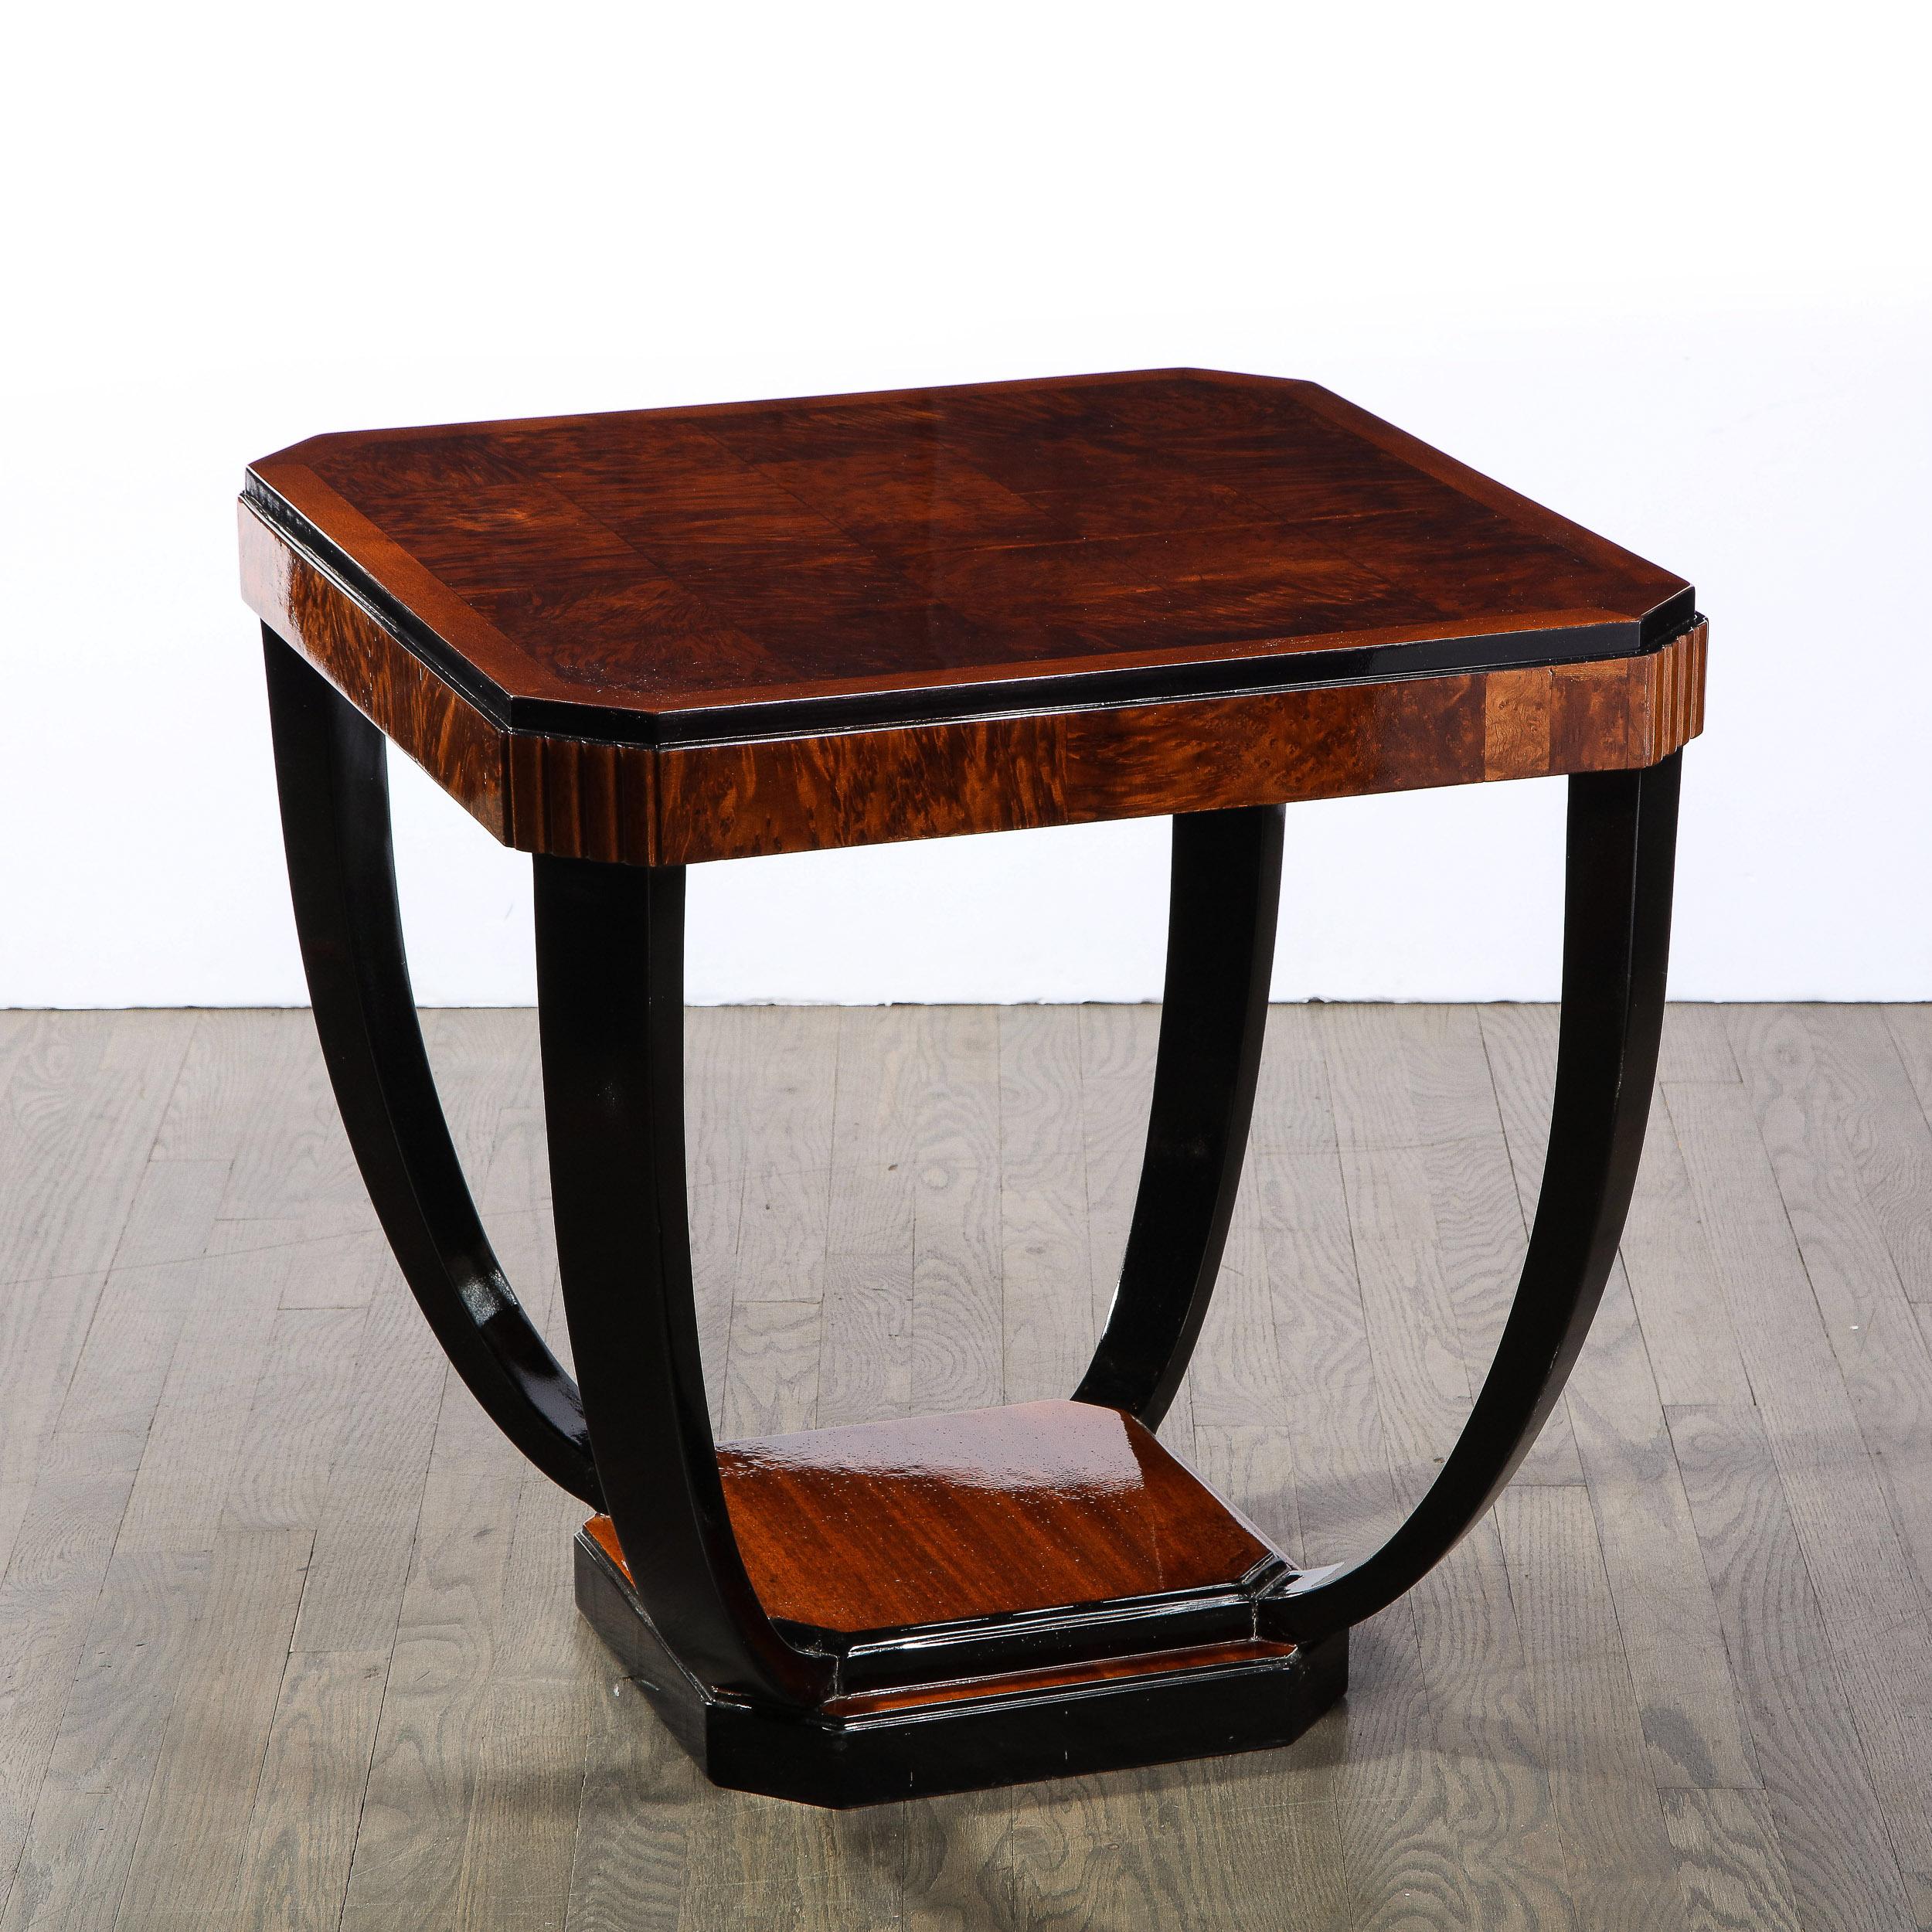 Art Deco Streamlined Cocktail Table in Bookmatched Burled Walnut & Black Lacquer In Excellent Condition For Sale In New York, NY